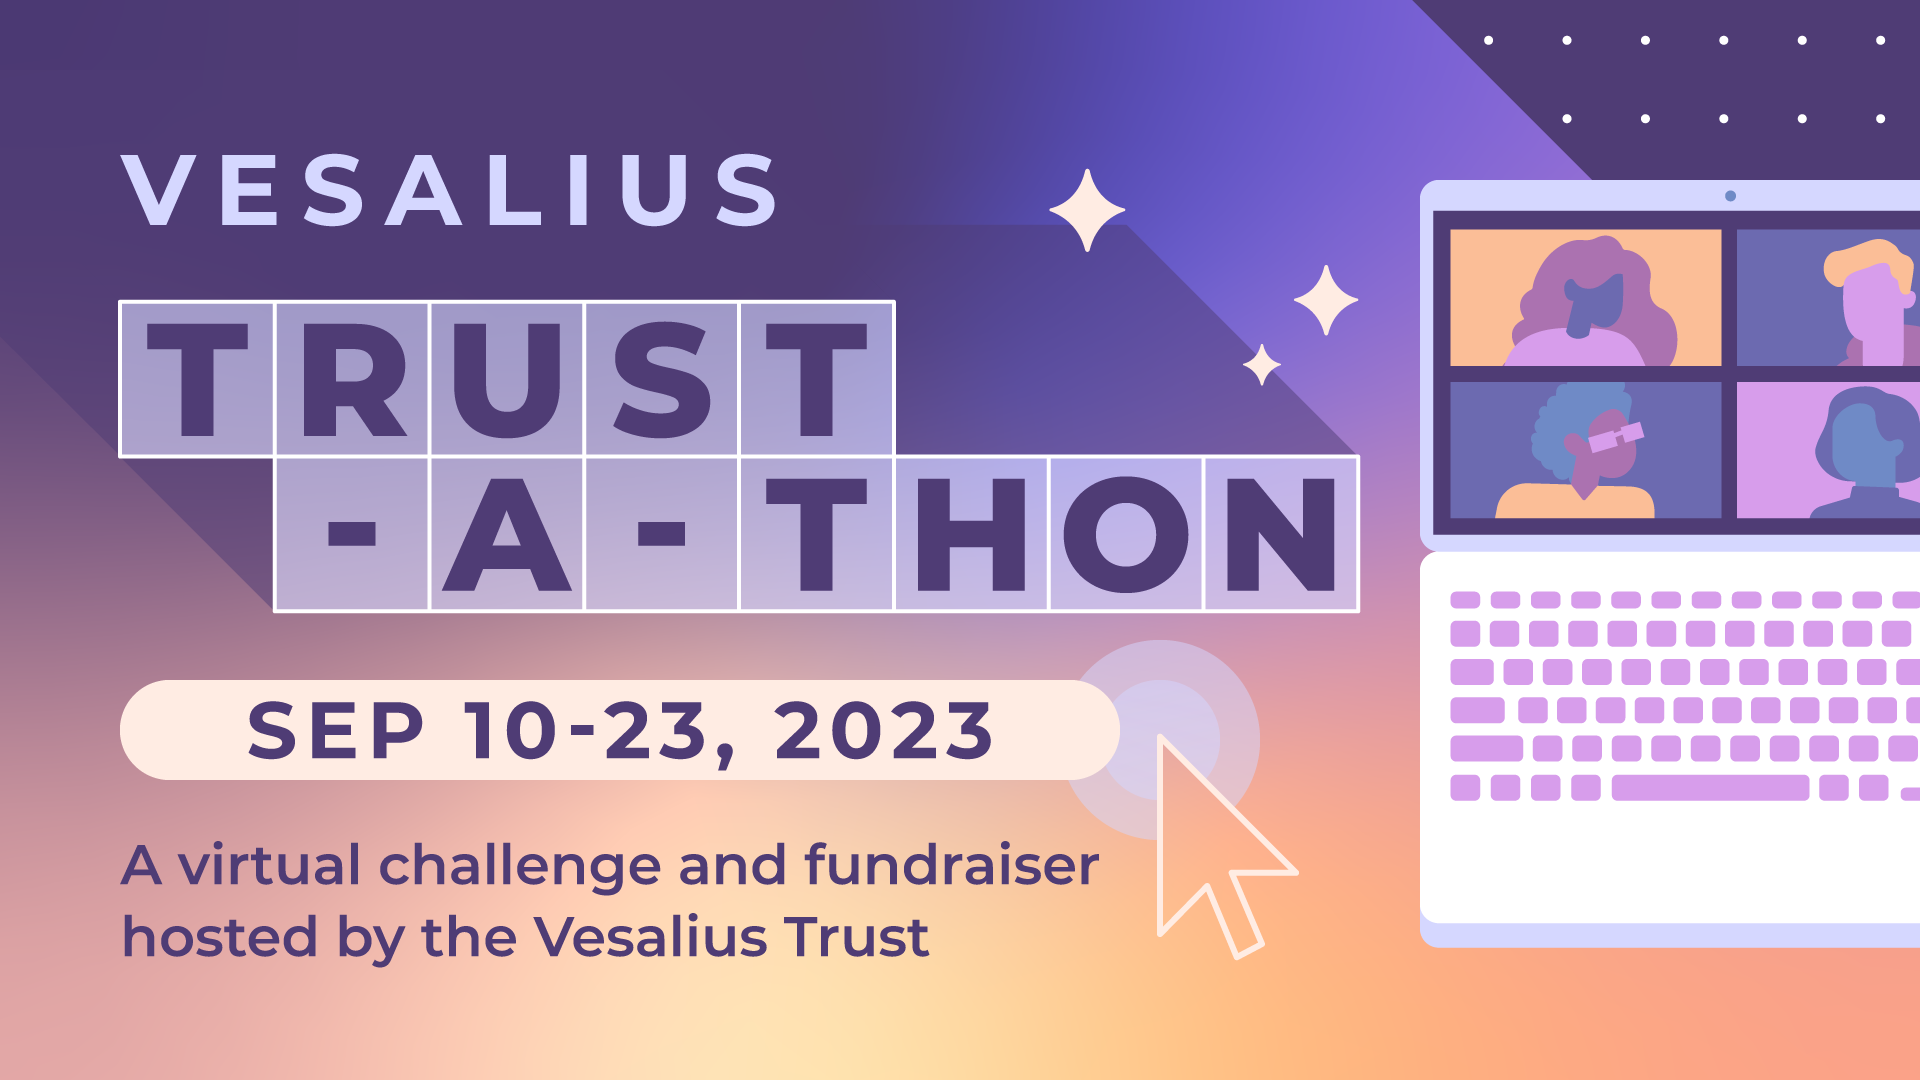 Trust-a-thon event banner. Event running from September 10 to 23, 2023. A virtual challenge and fundraiser hosted by the Vesalius Trust